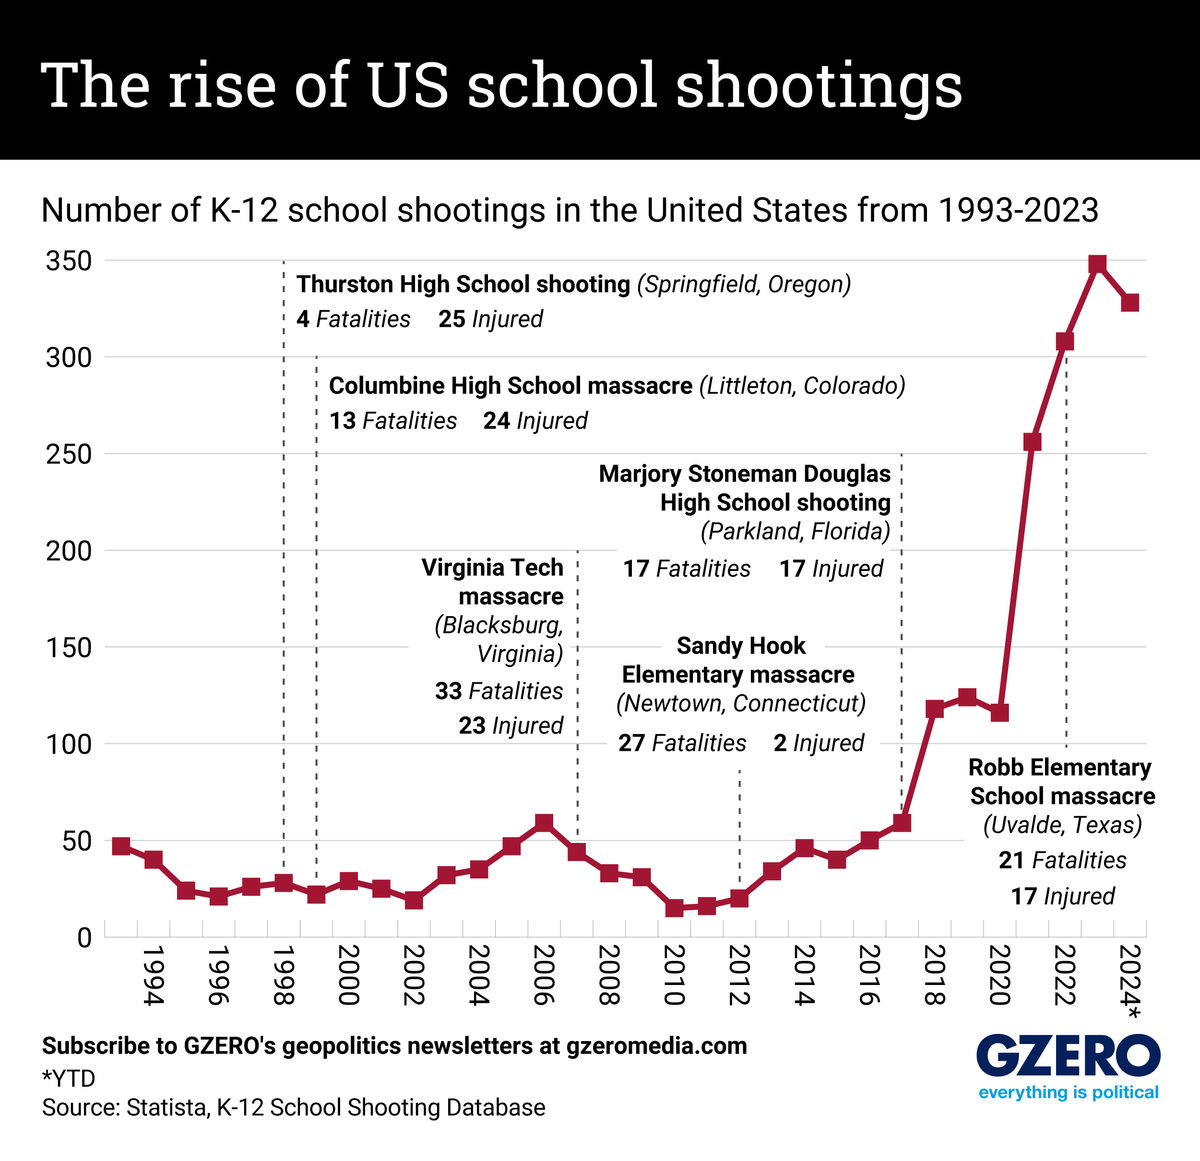 Graphic Truth: The rise of US school shootings